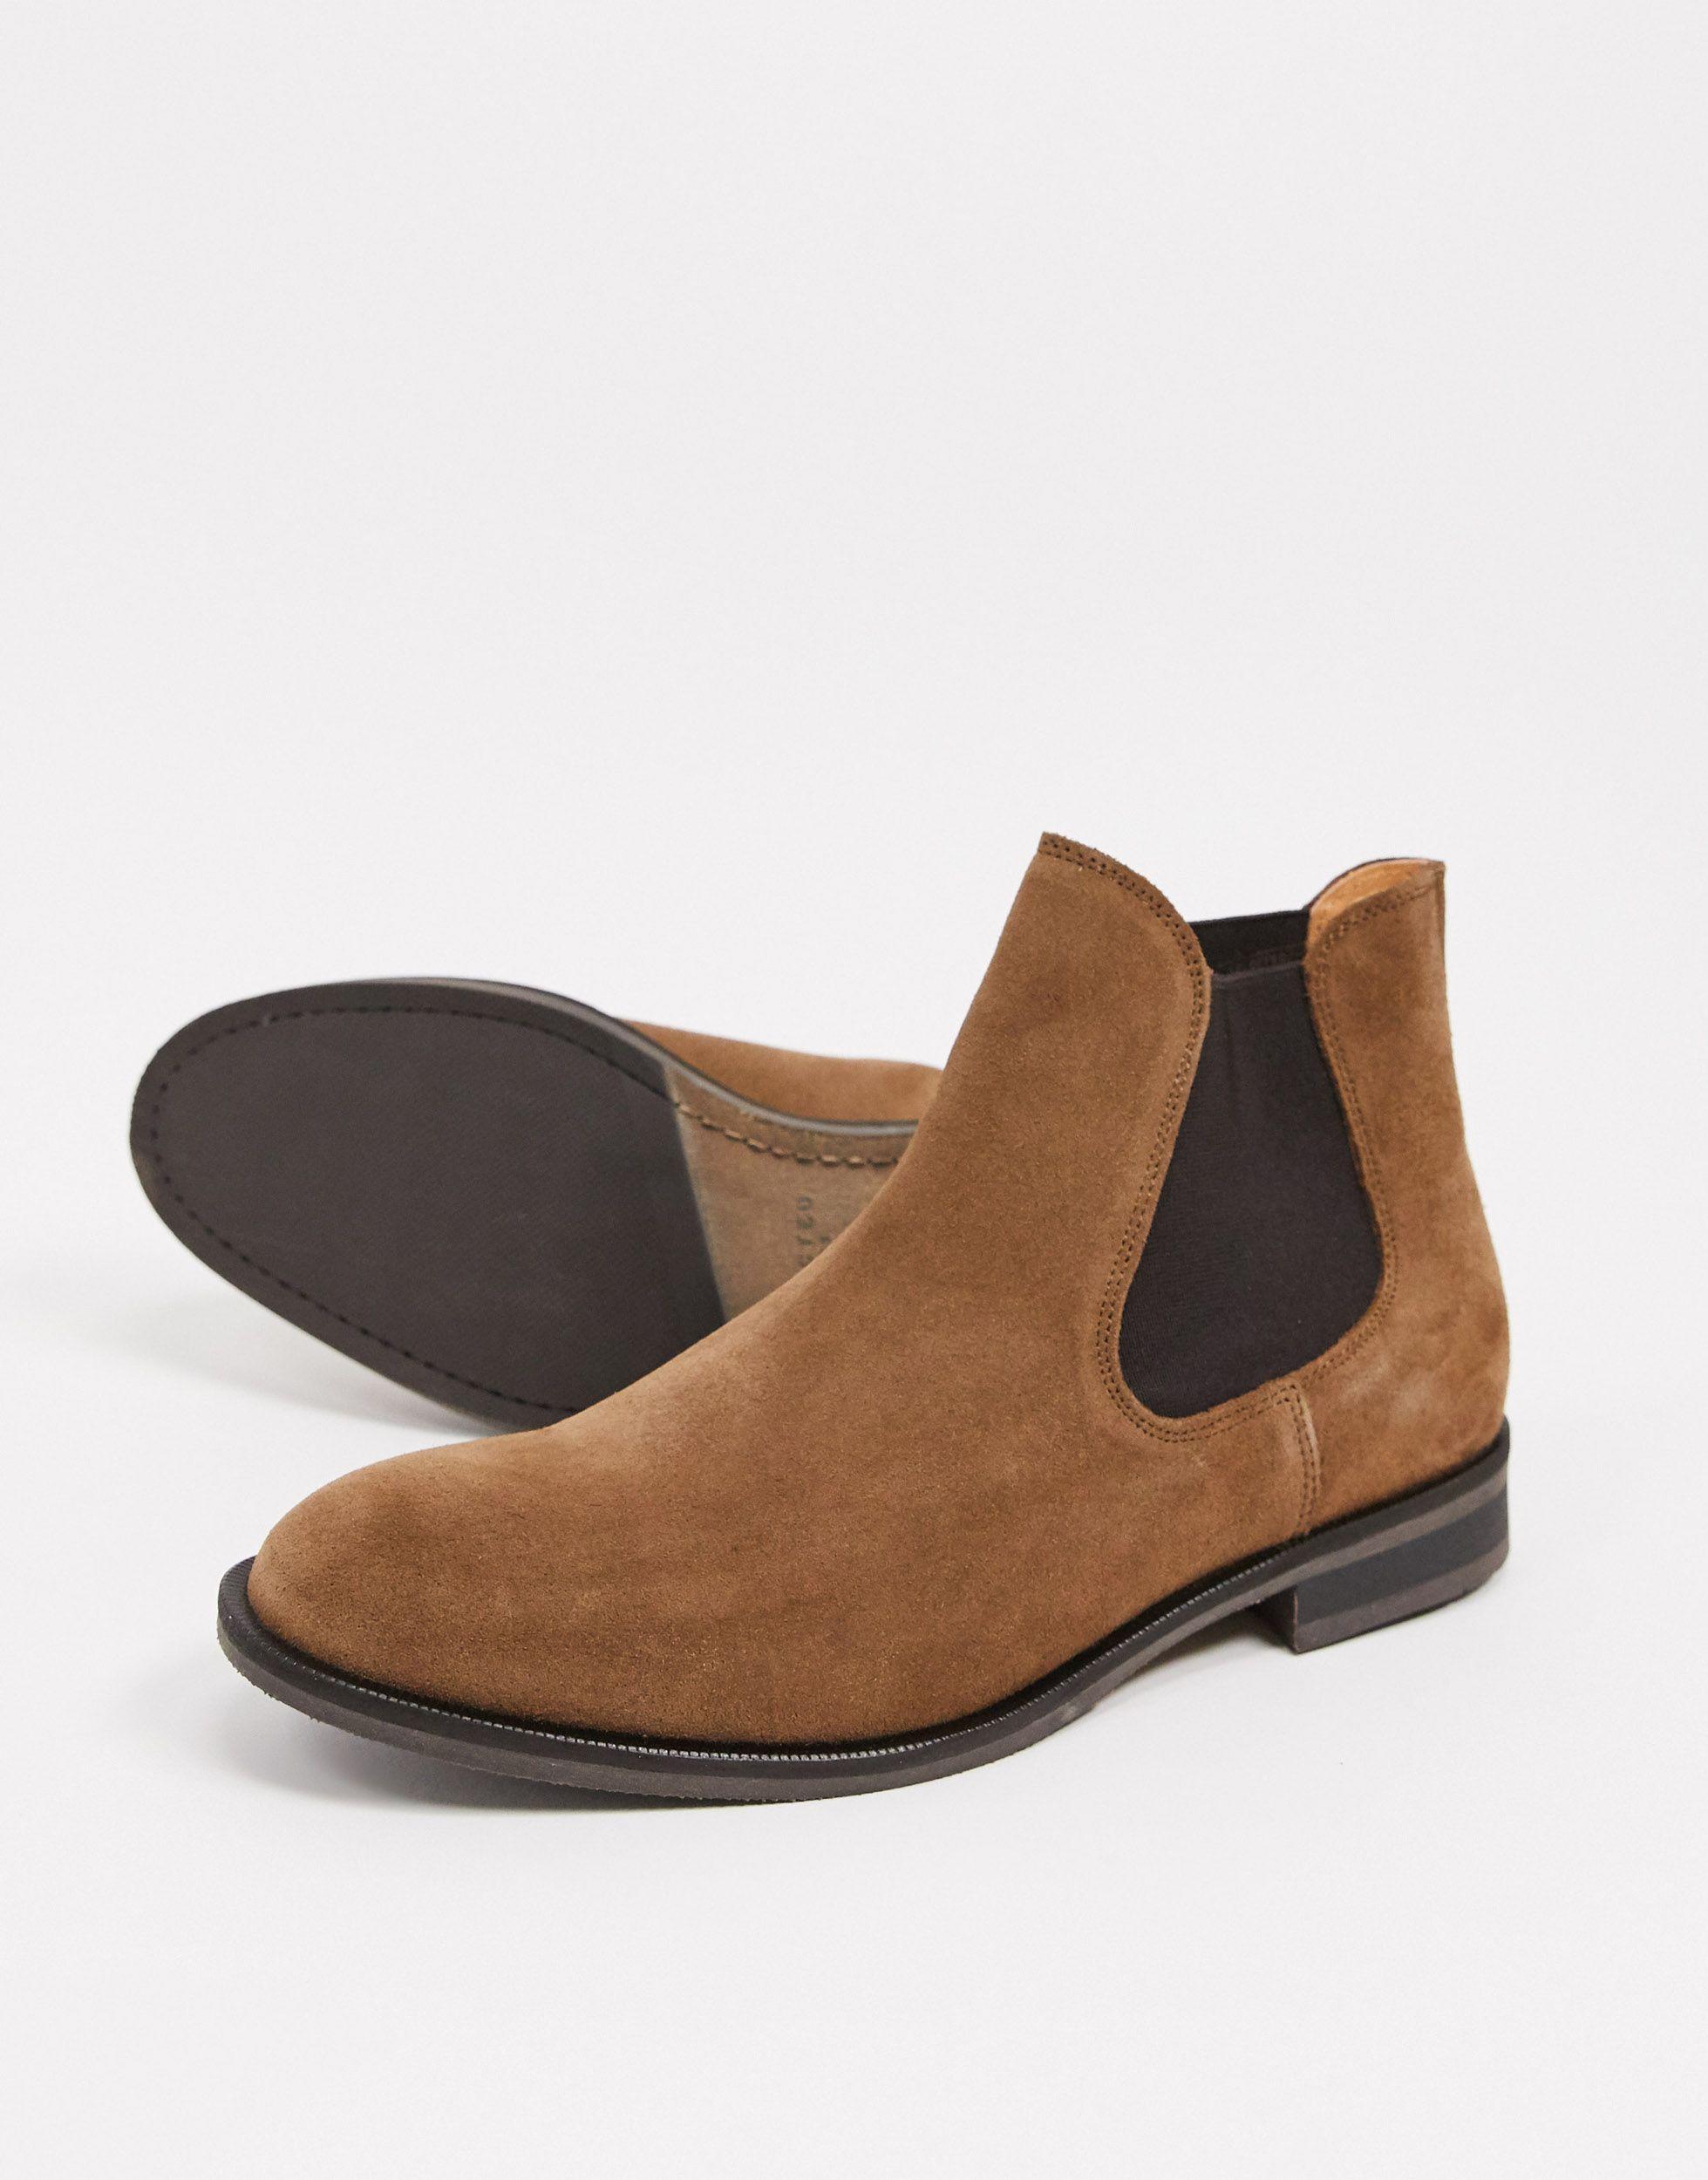 SELECTED Suede Chelsea Boot in Tan (Brown) for Men - Lyst